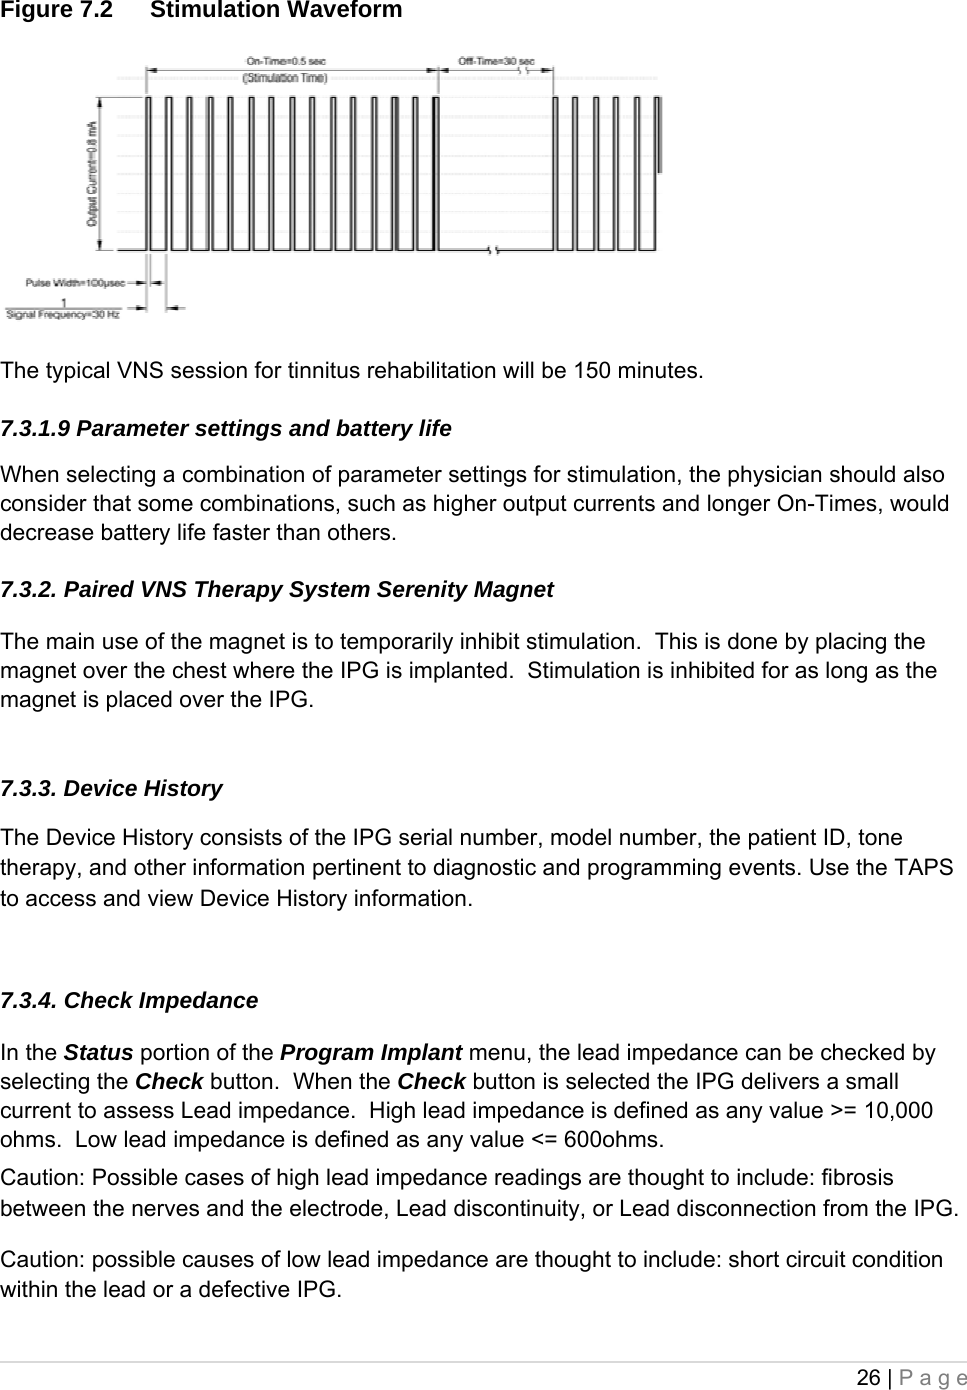 26 | Page  Figure 7.2  Stimulation Waveform    The typical VNS session for tinnitus rehabilitation will be 150 minutes.    7.3.1.9 Parameter settings and battery life  When selecting a combination of parameter settings for stimulation, the physician should also consider that some combinations, such as higher output currents and longer On-Times, would decrease battery life faster than others.  7.3.2. Paired VNS Therapy System Serenity Magnet  The main use of the magnet is to temporarily inhibit stimulation.  This is done by placing the magnet over the chest where the IPG is implanted.  Stimulation is inhibited for as long as the magnet is placed over the IPG.  7.3.3. Device History  The Device History consists of the IPG serial number, model number, the patient ID, tone therapy, and other information pertinent to diagnostic and programming events. Use the TAPS to access and view Device History information.  7.3.4. Check Impedance  In the Status portion of the Program Implant menu, the lead impedance can be checked by selecting the Check button.  When the Check button is selected the IPG delivers a small current to assess Lead impedance.  High lead impedance is defined as any value &gt;= 10,000 ohms.  Low lead impedance is defined as any value &lt;= 600ohms. Caution: Possible cases of high lead impedance readings are thought to include: fibrosis between the nerves and the electrode, Lead discontinuity, or Lead disconnection from the IPG. Caution: possible causes of low lead impedance are thought to include: short circuit condition within the lead or a defective IPG. 